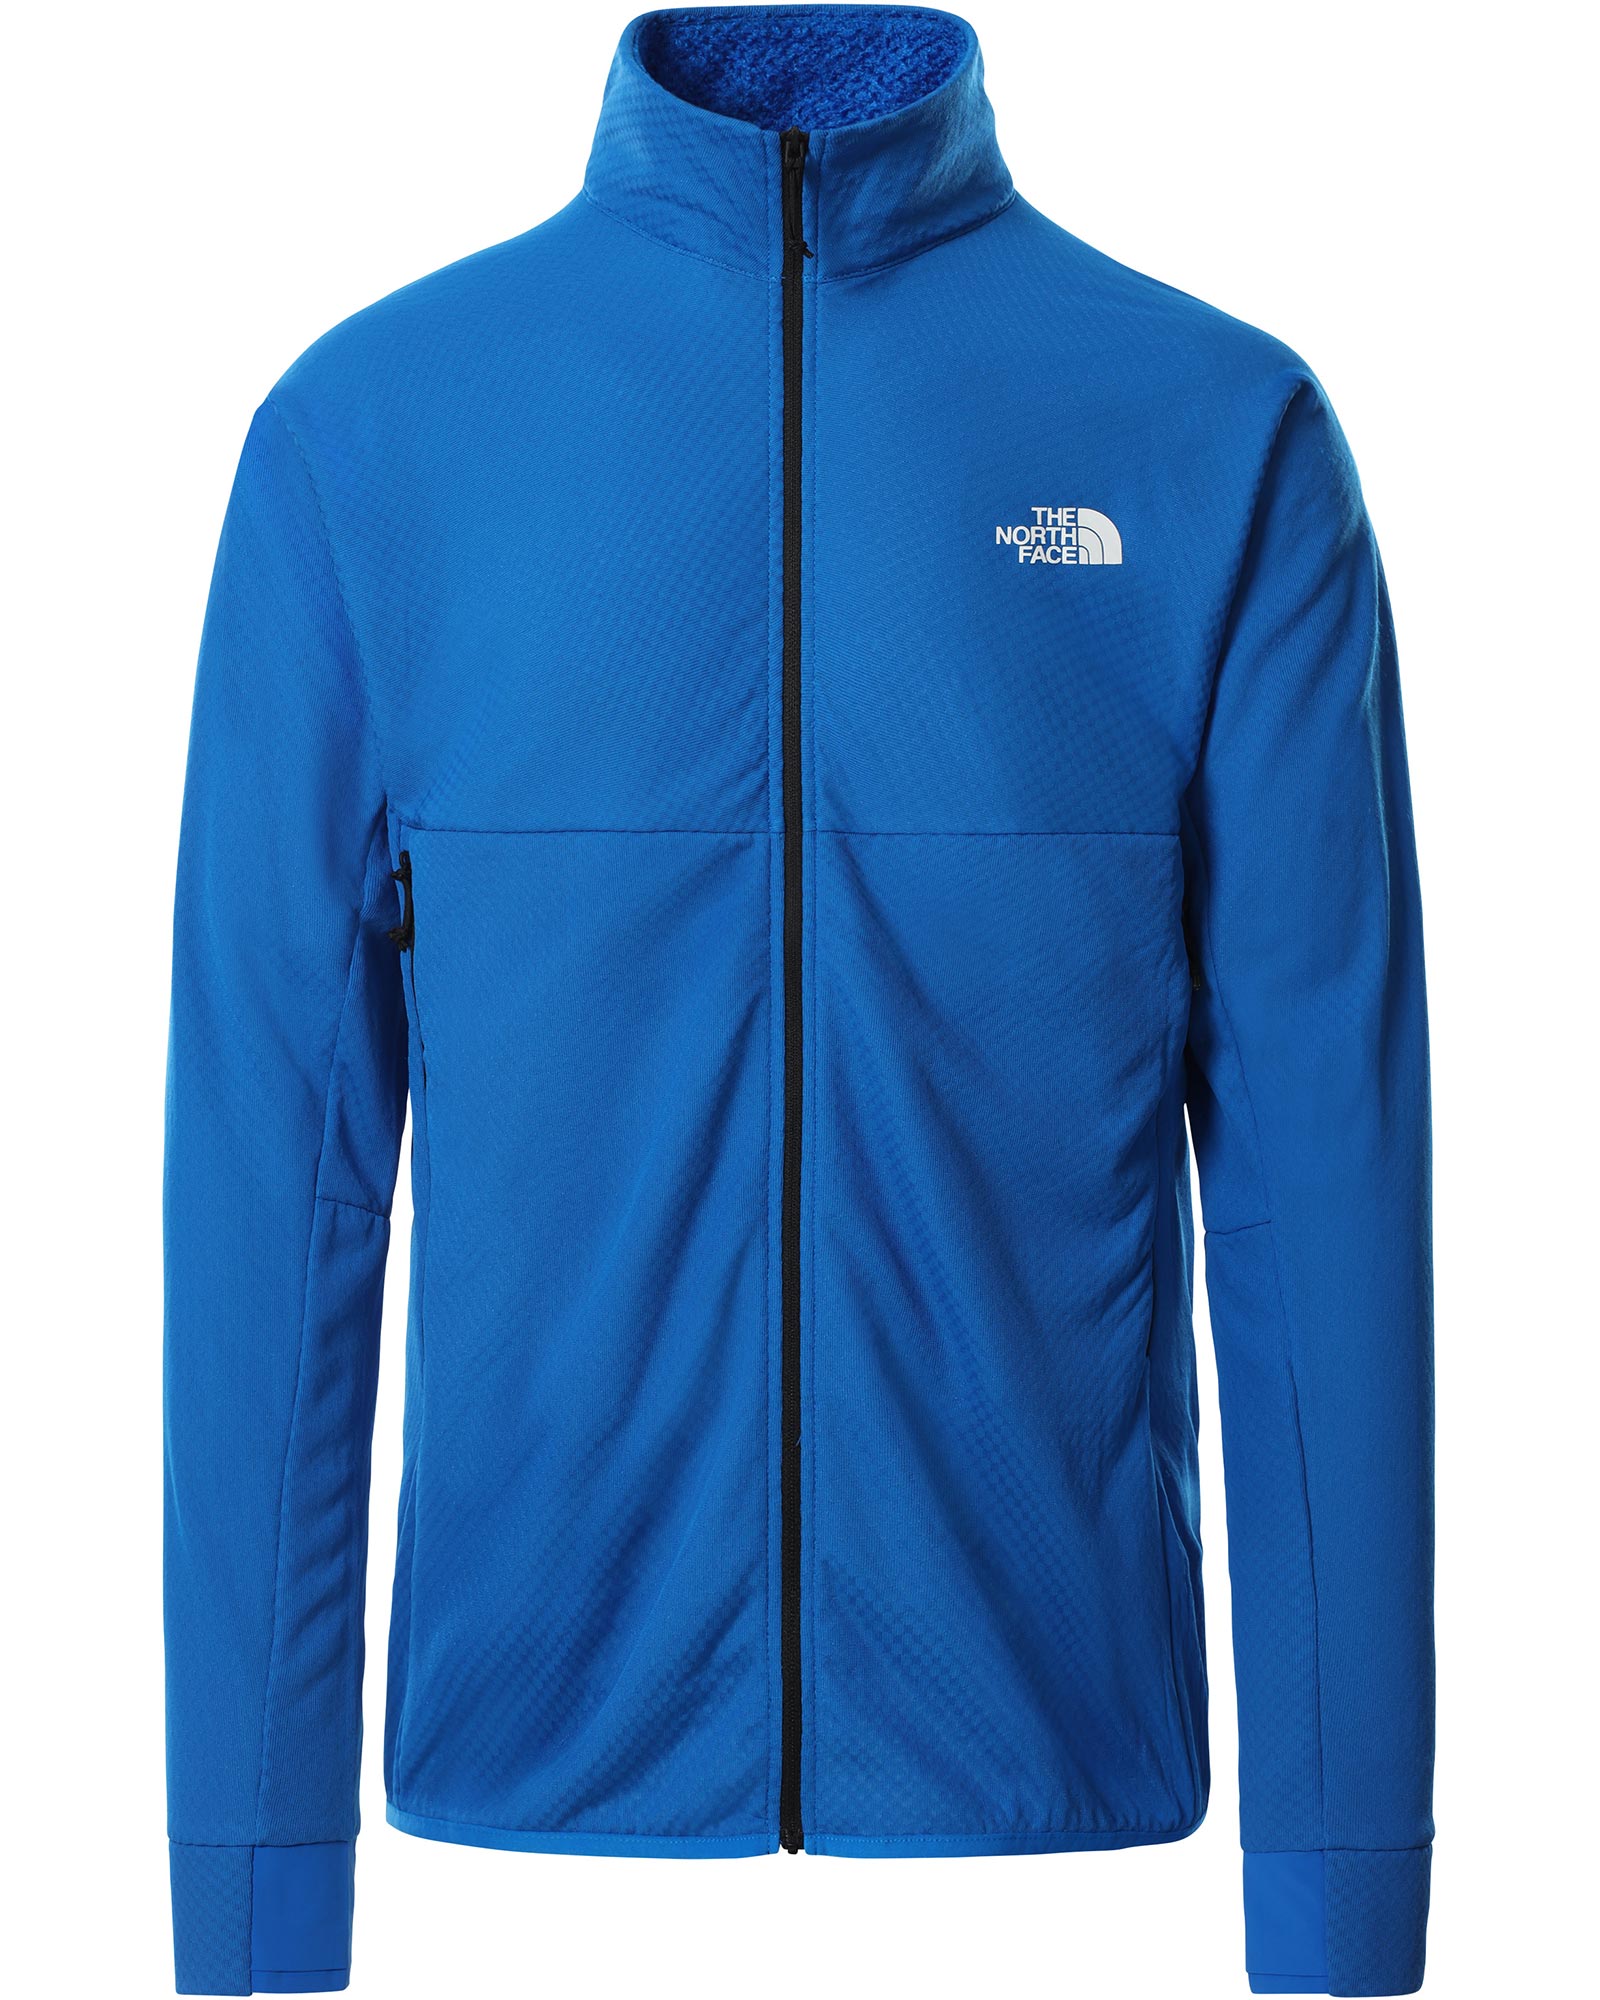 The North Face Summit Series L2 Mens Fleece